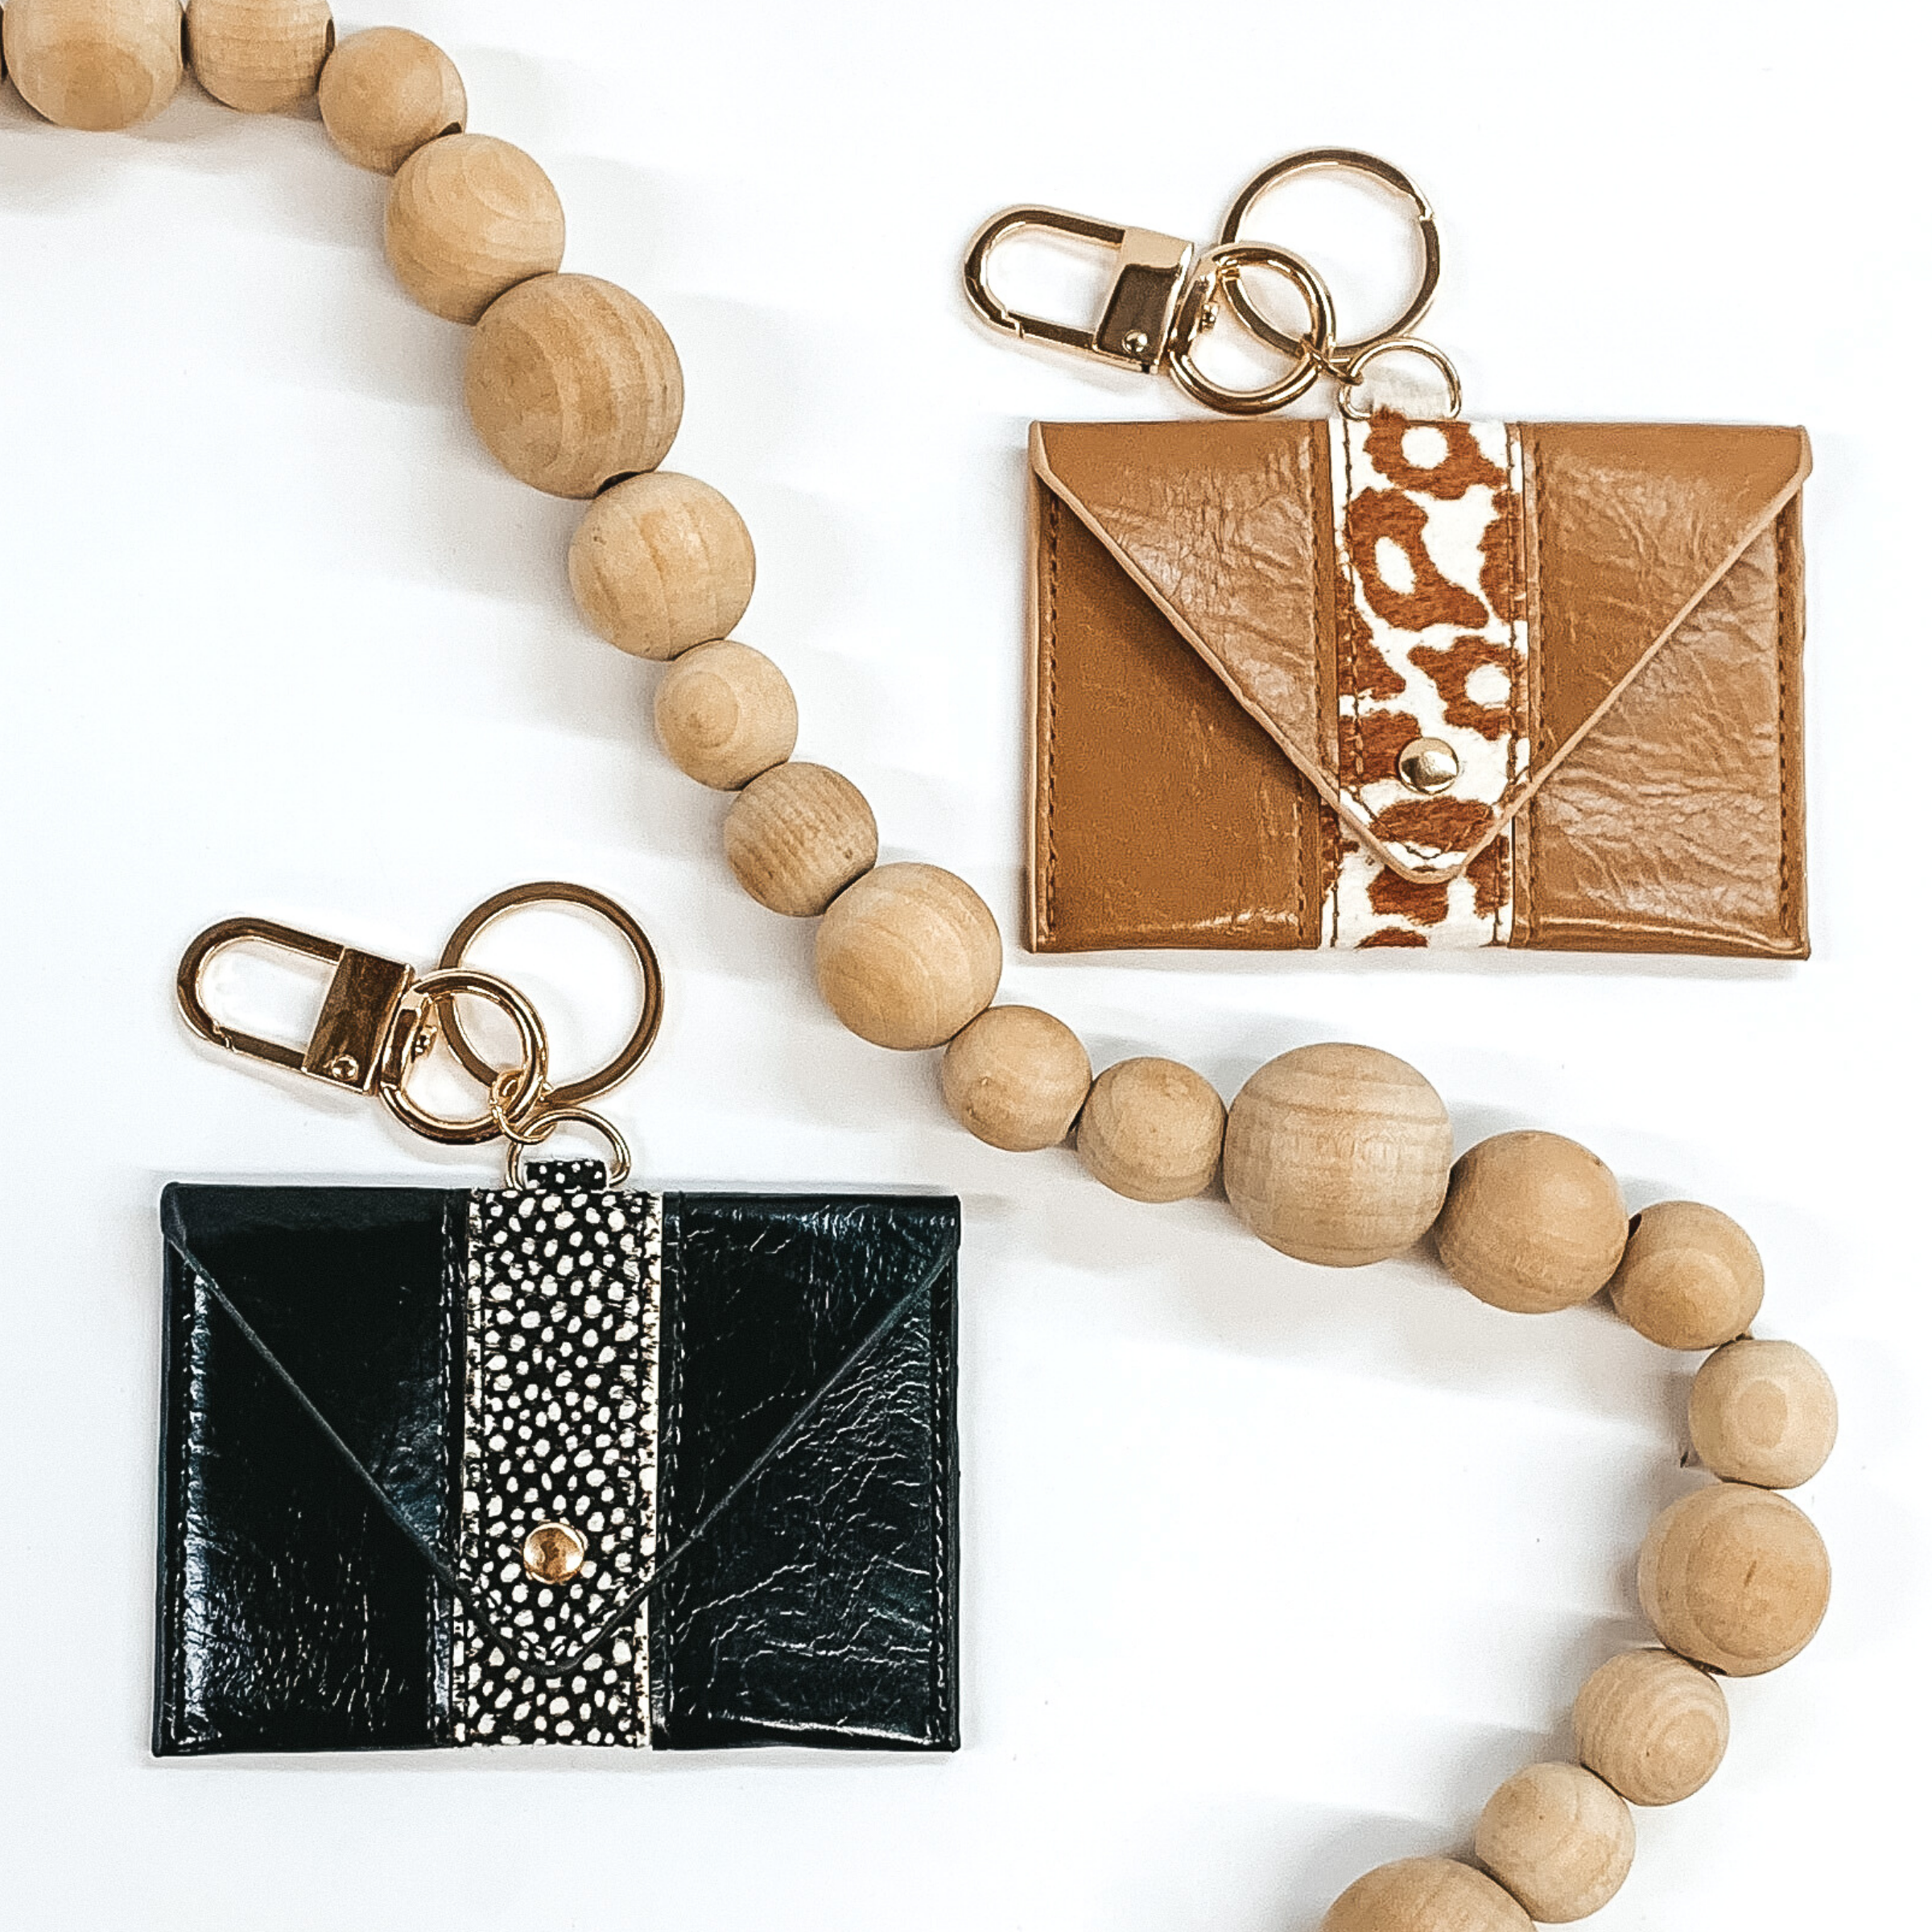 Find Your Way Leather Key Chain Wallet in Black - Giddy Up Glamour Boutique